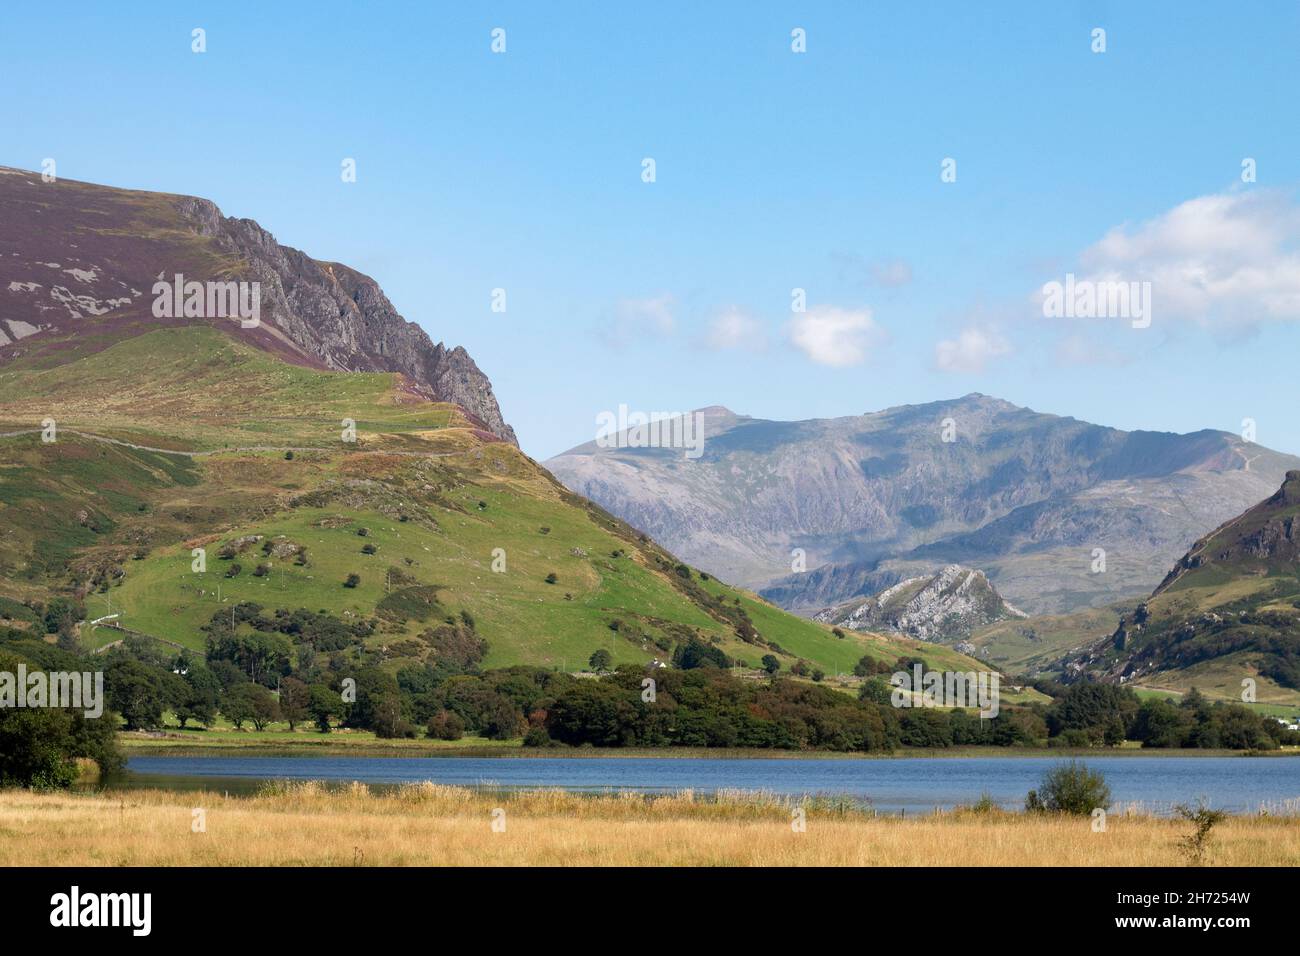 Beautiful lake Nantlle, Snowdonia, Wales. Panorama with foreground of water and meadow. Dramatic, rugged Mount Snowdon in the background.  Landscape a Stock Photo